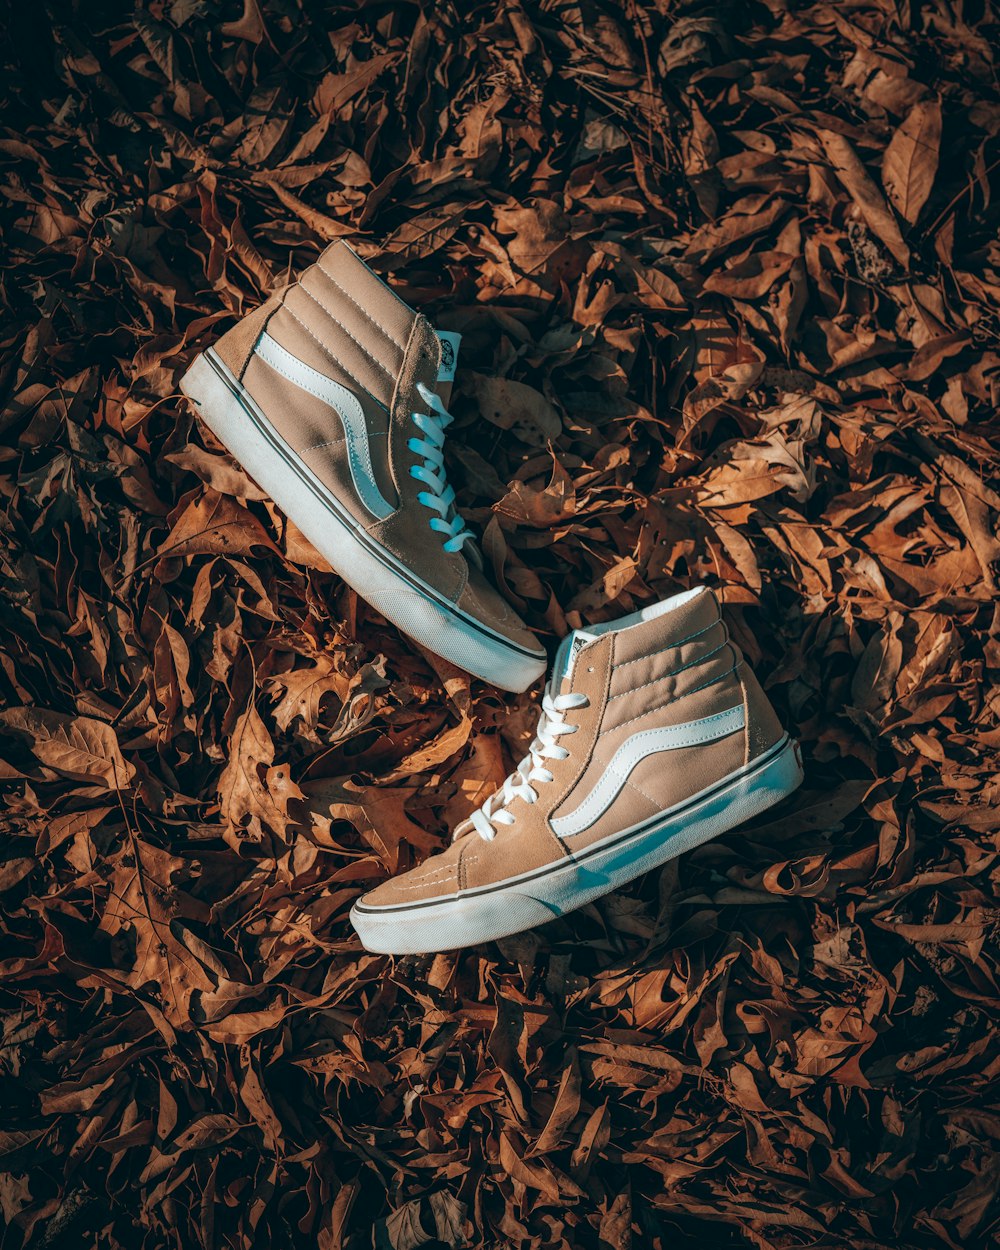 pair of blue and white nike sneakers on brown dried leaves